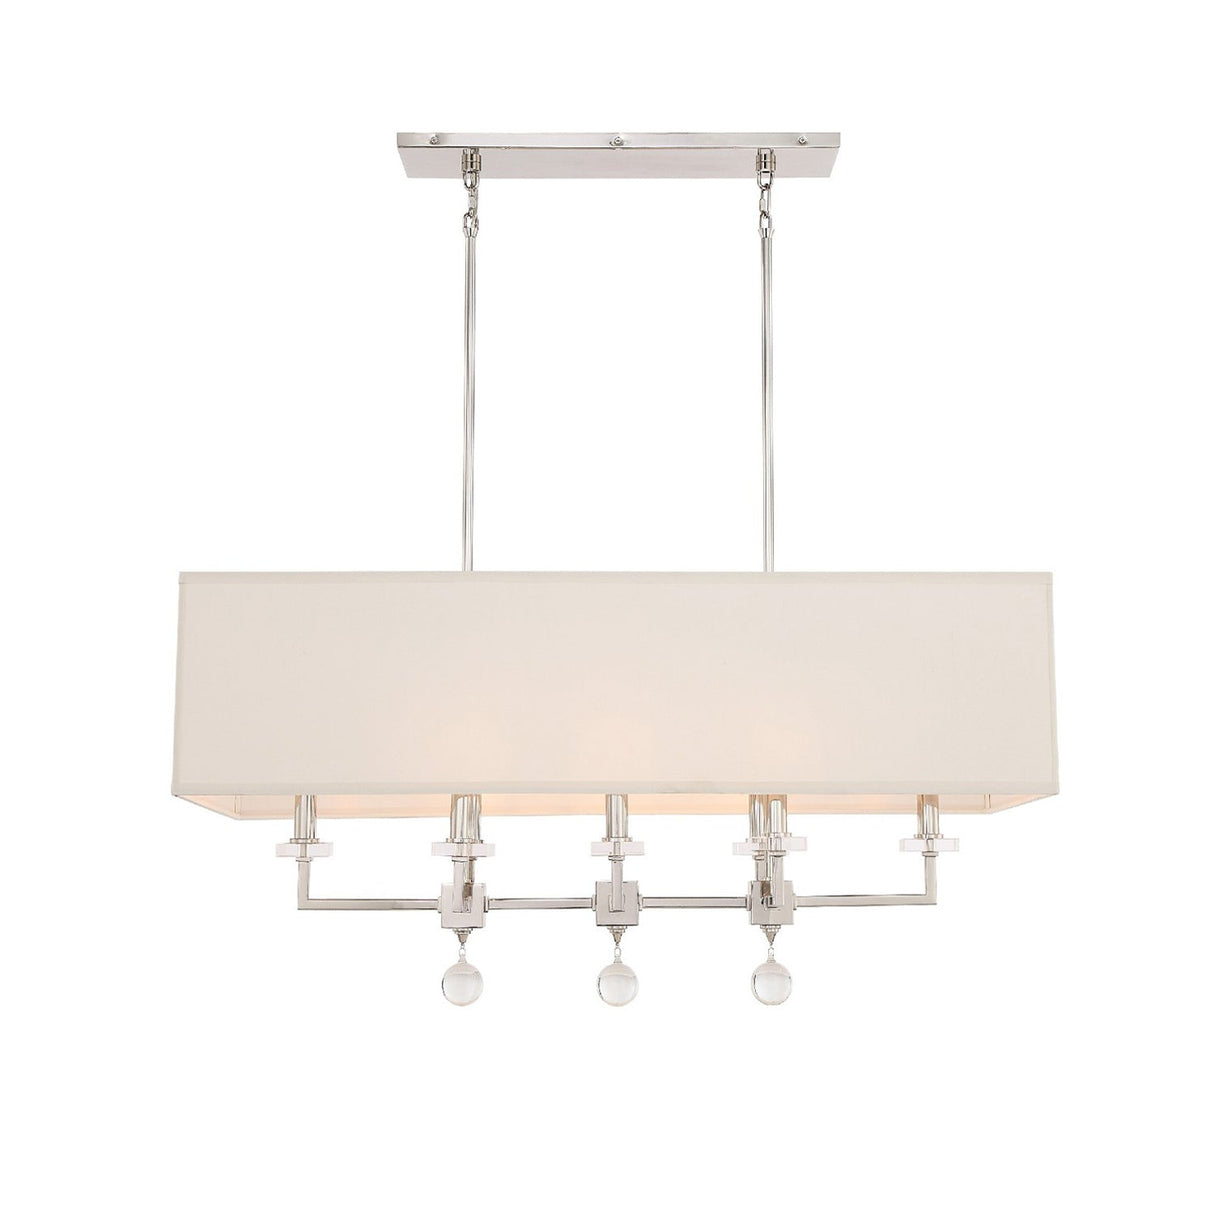 Paxton 8 Light Polished Nickel Linear Chandelier 8109-PN